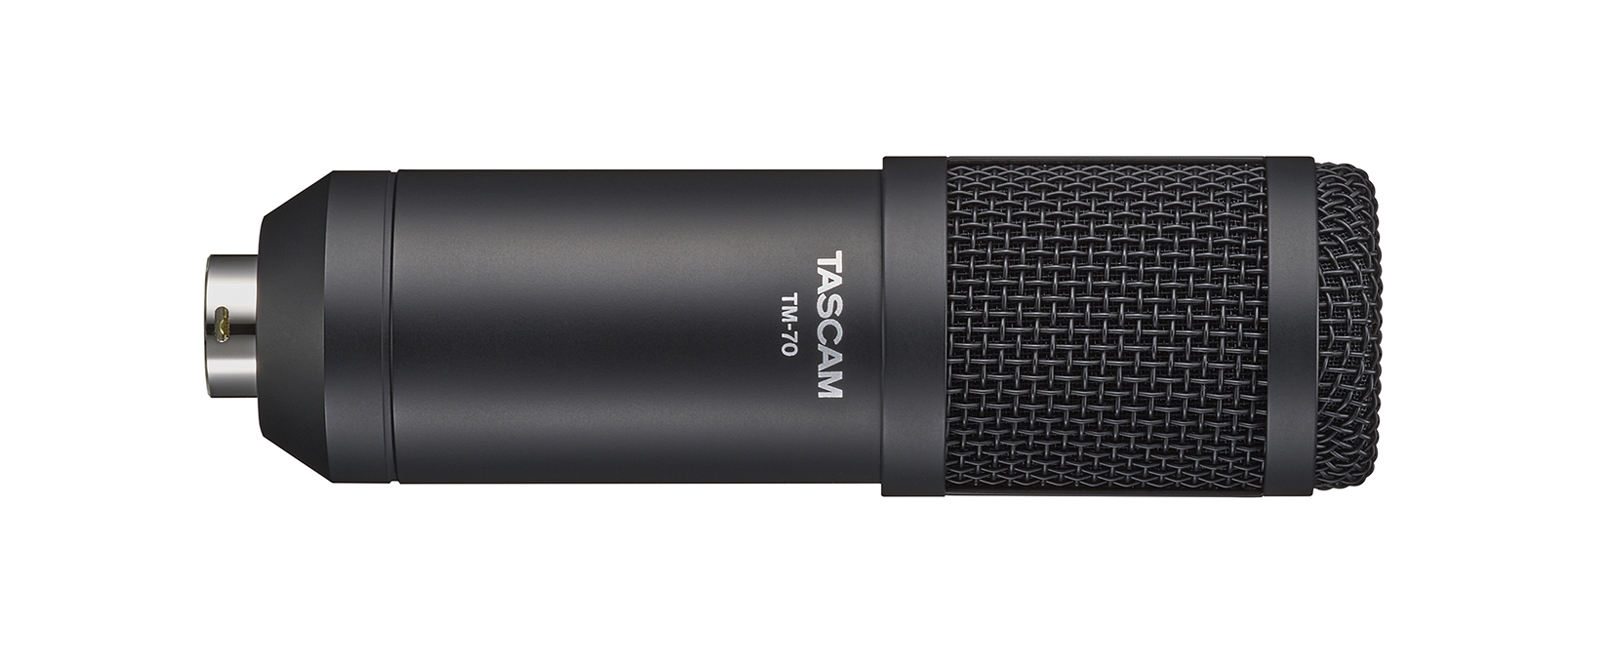 TASCAM Announces the TM-70 Dynamic Microphone for Broadcasting